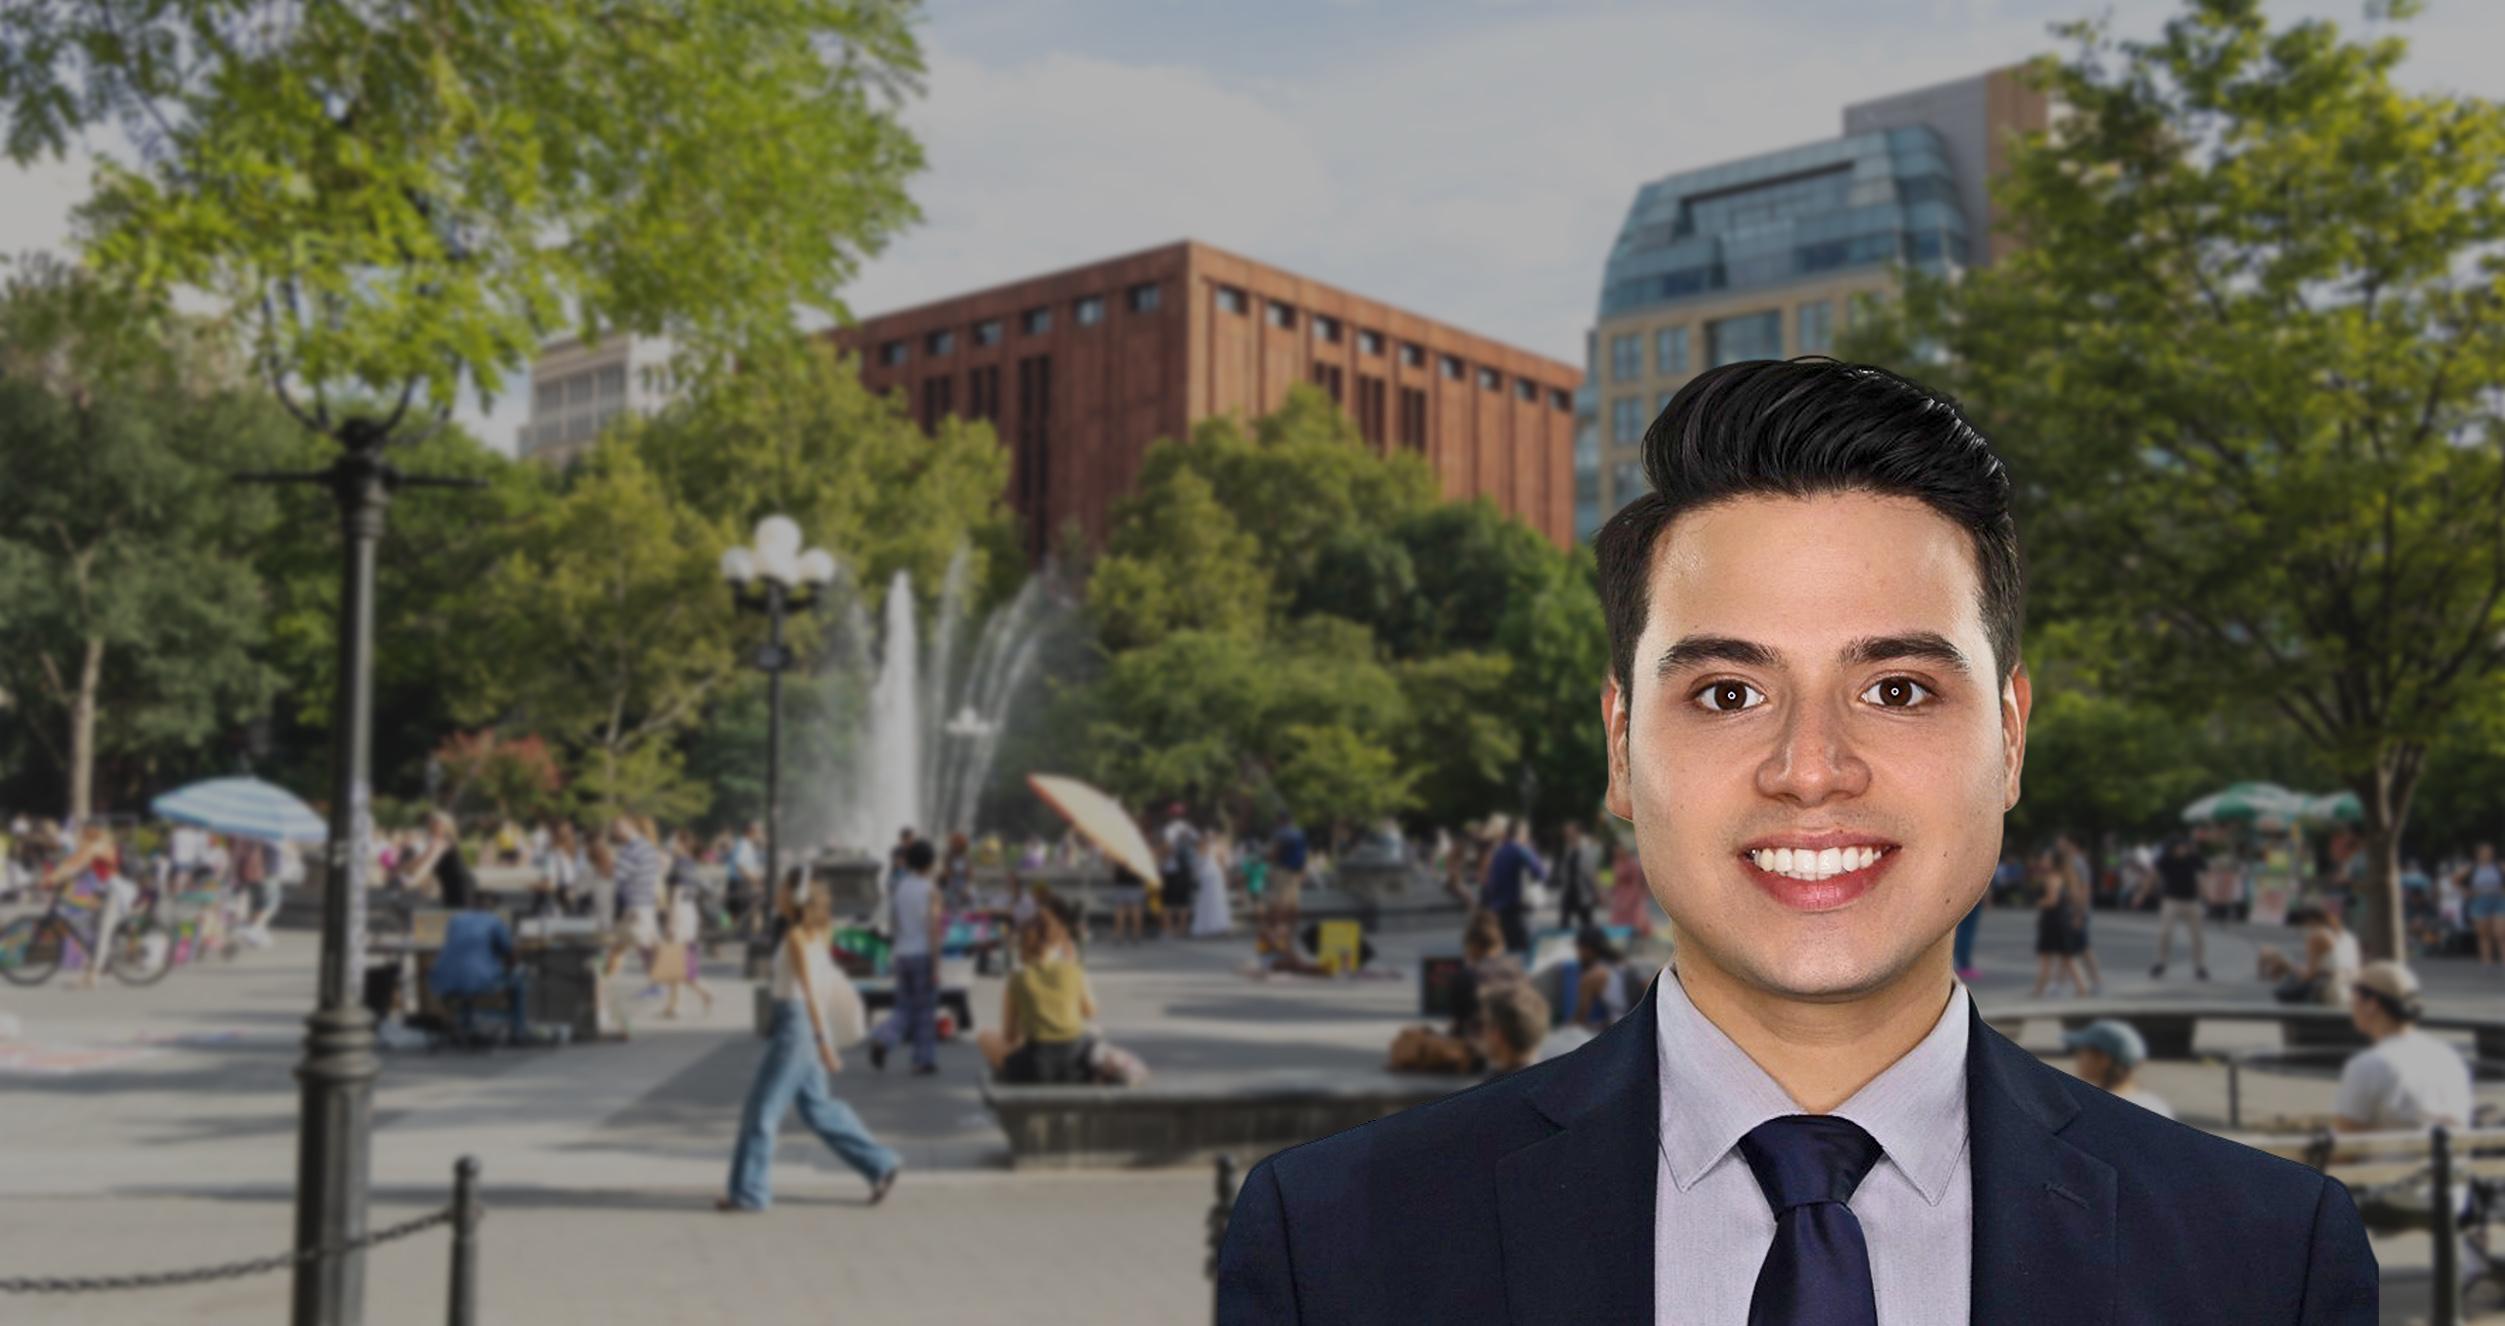 Jose Fuentes with background of Wshington Square Park